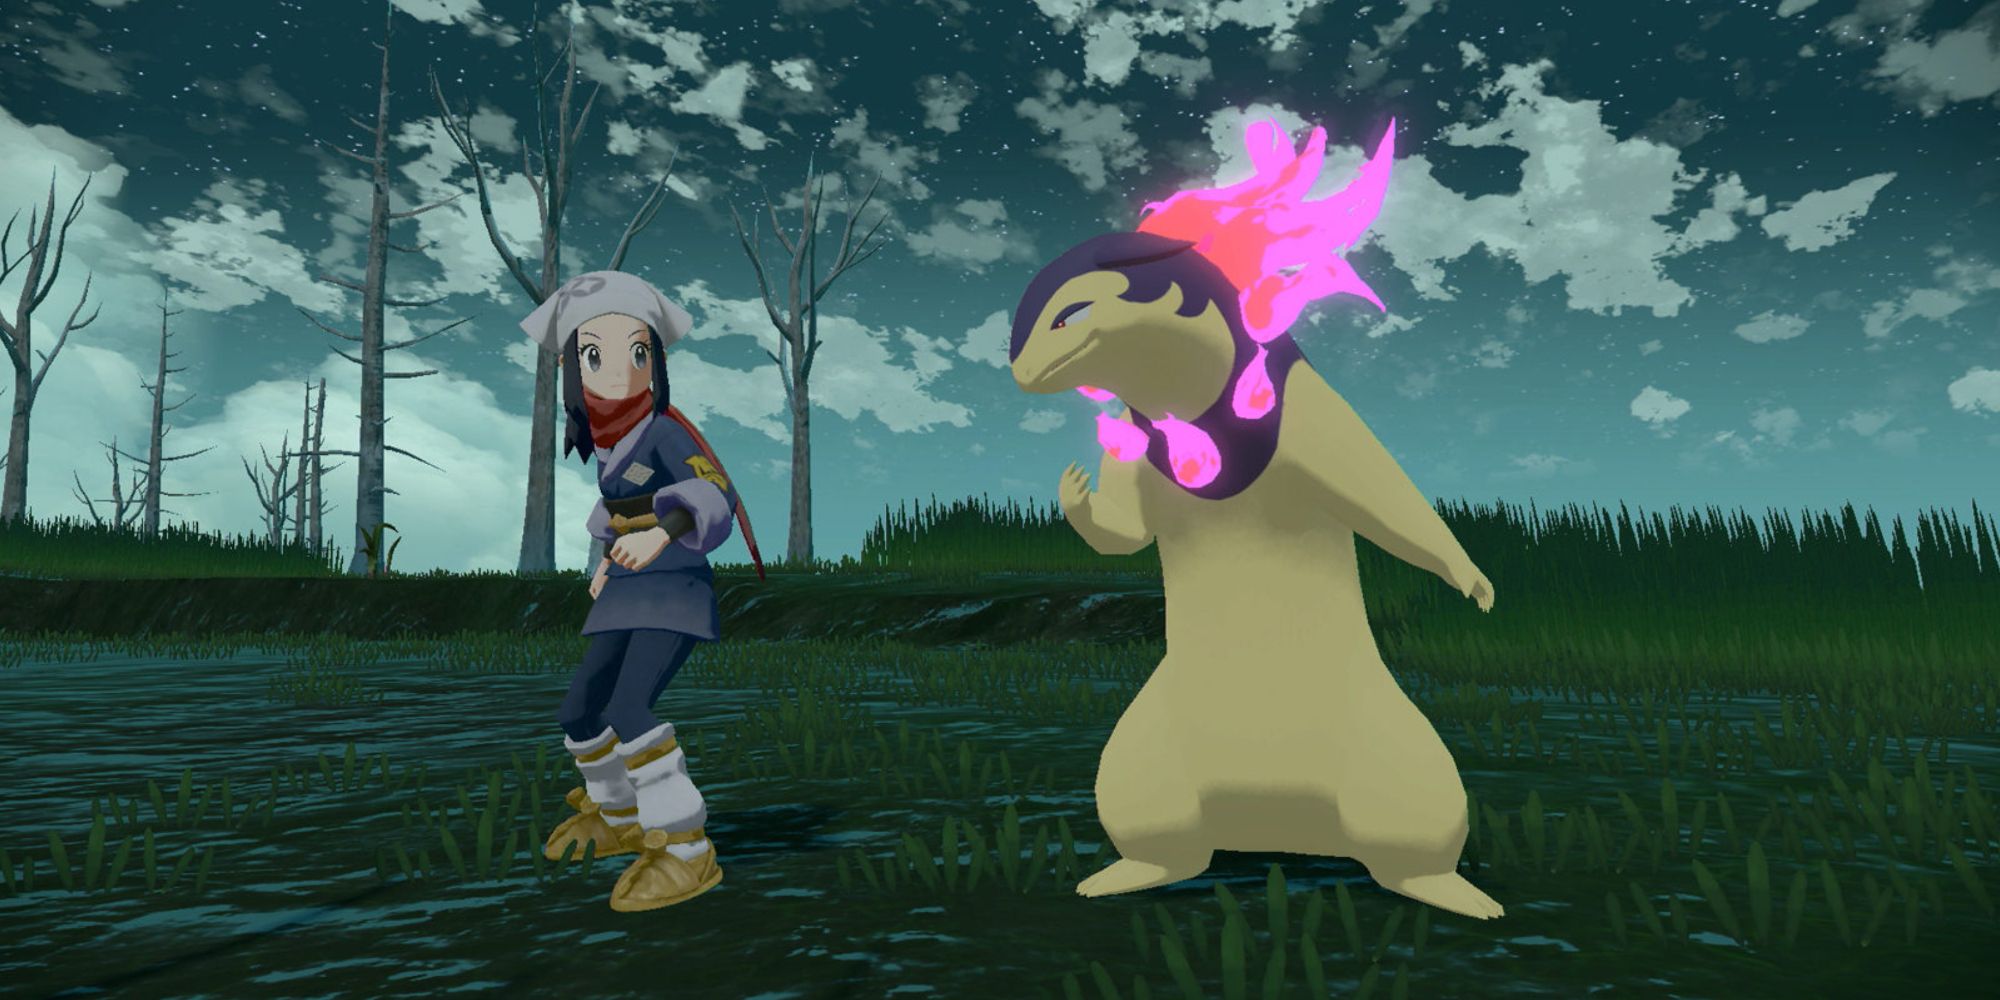 Trainer and Hisuian Typhlosion in Pokemon Legends Arceus